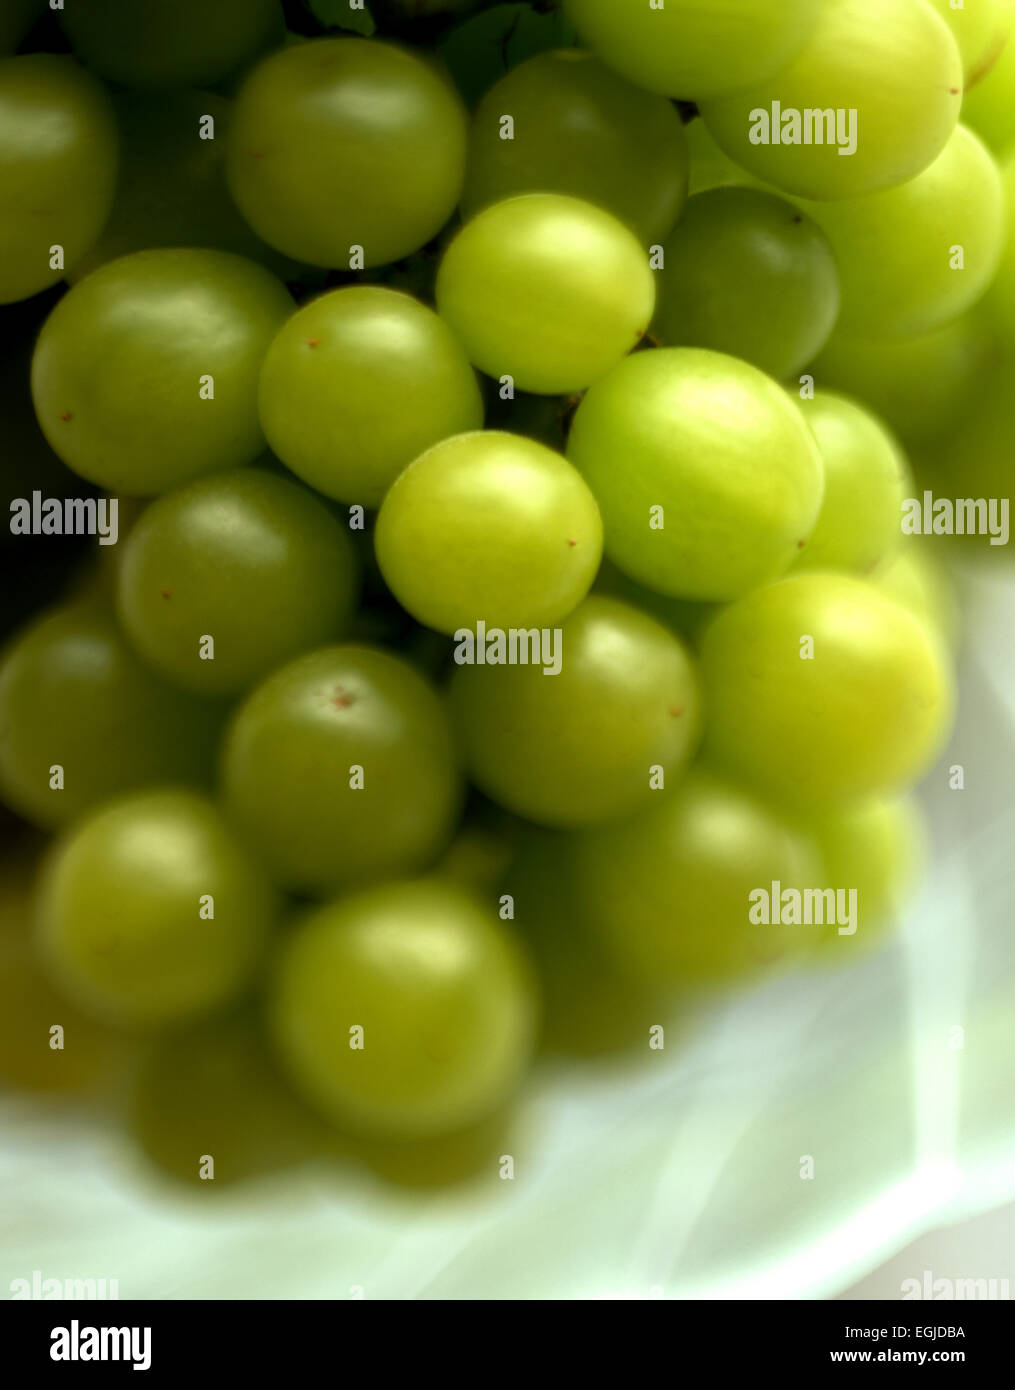 WHITE GRAPES IN A GLASS BOWL Stock Photo